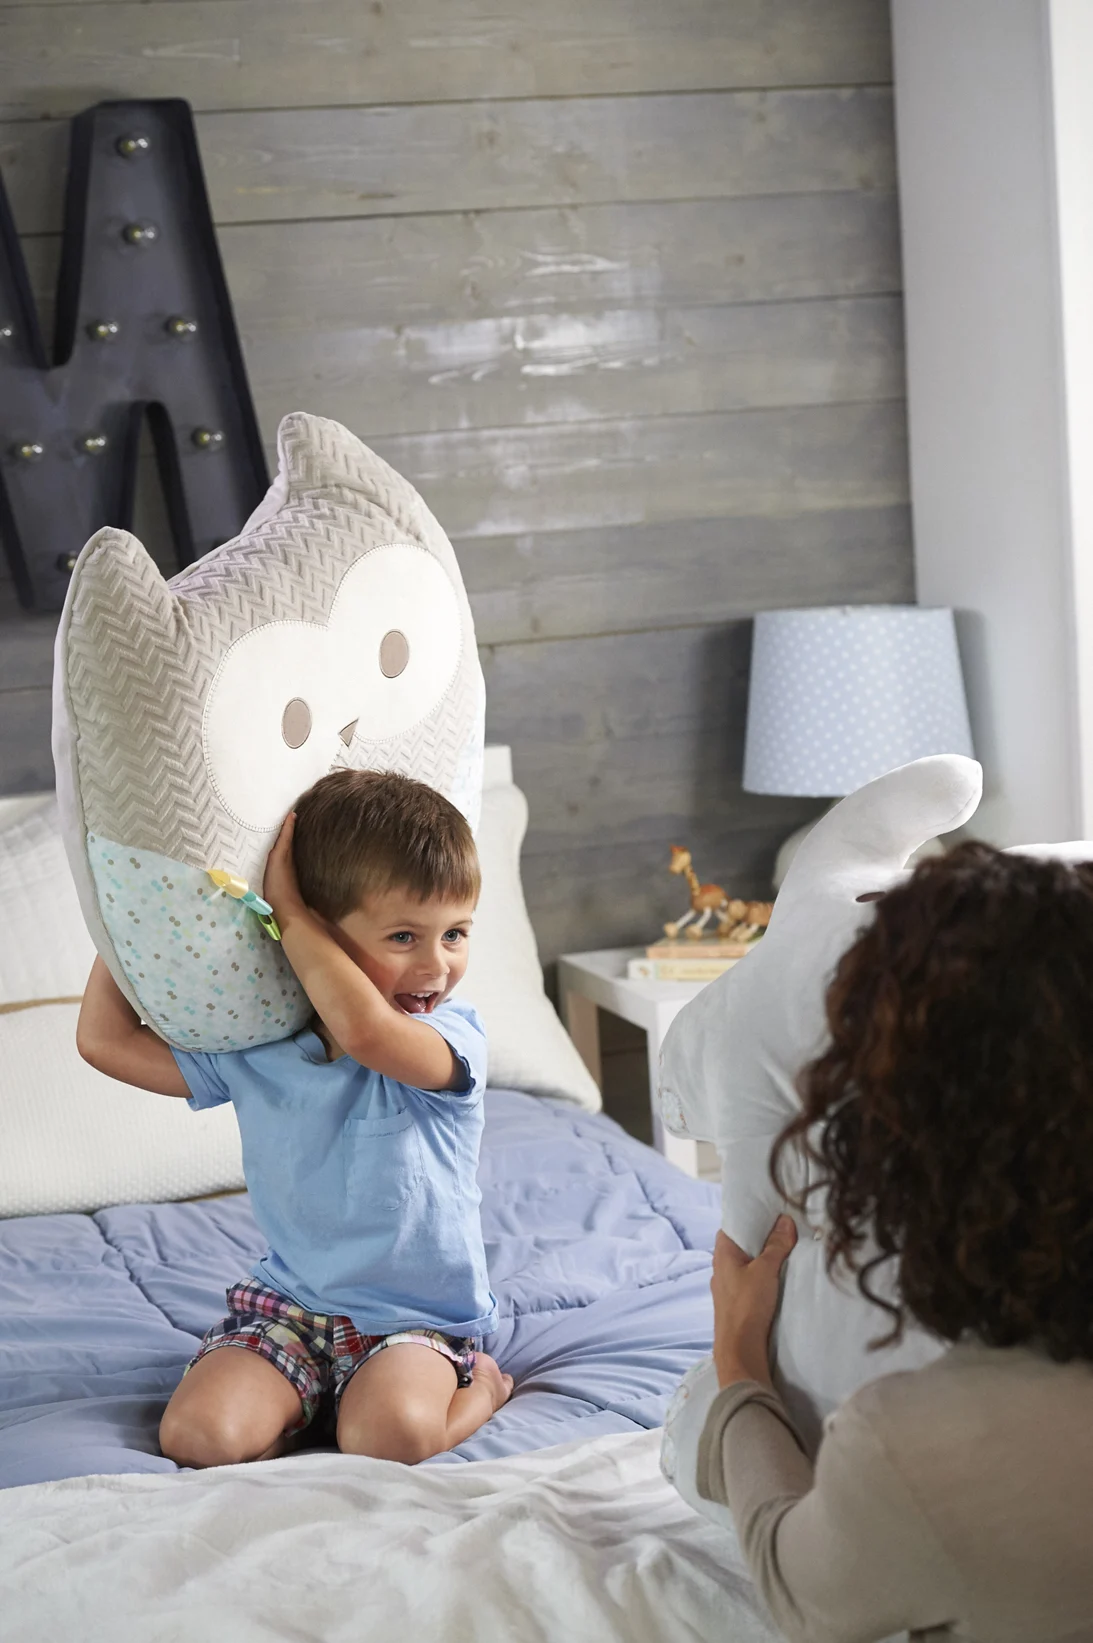 LoungeBuddies Infant Positioner from Comfort & Harmony